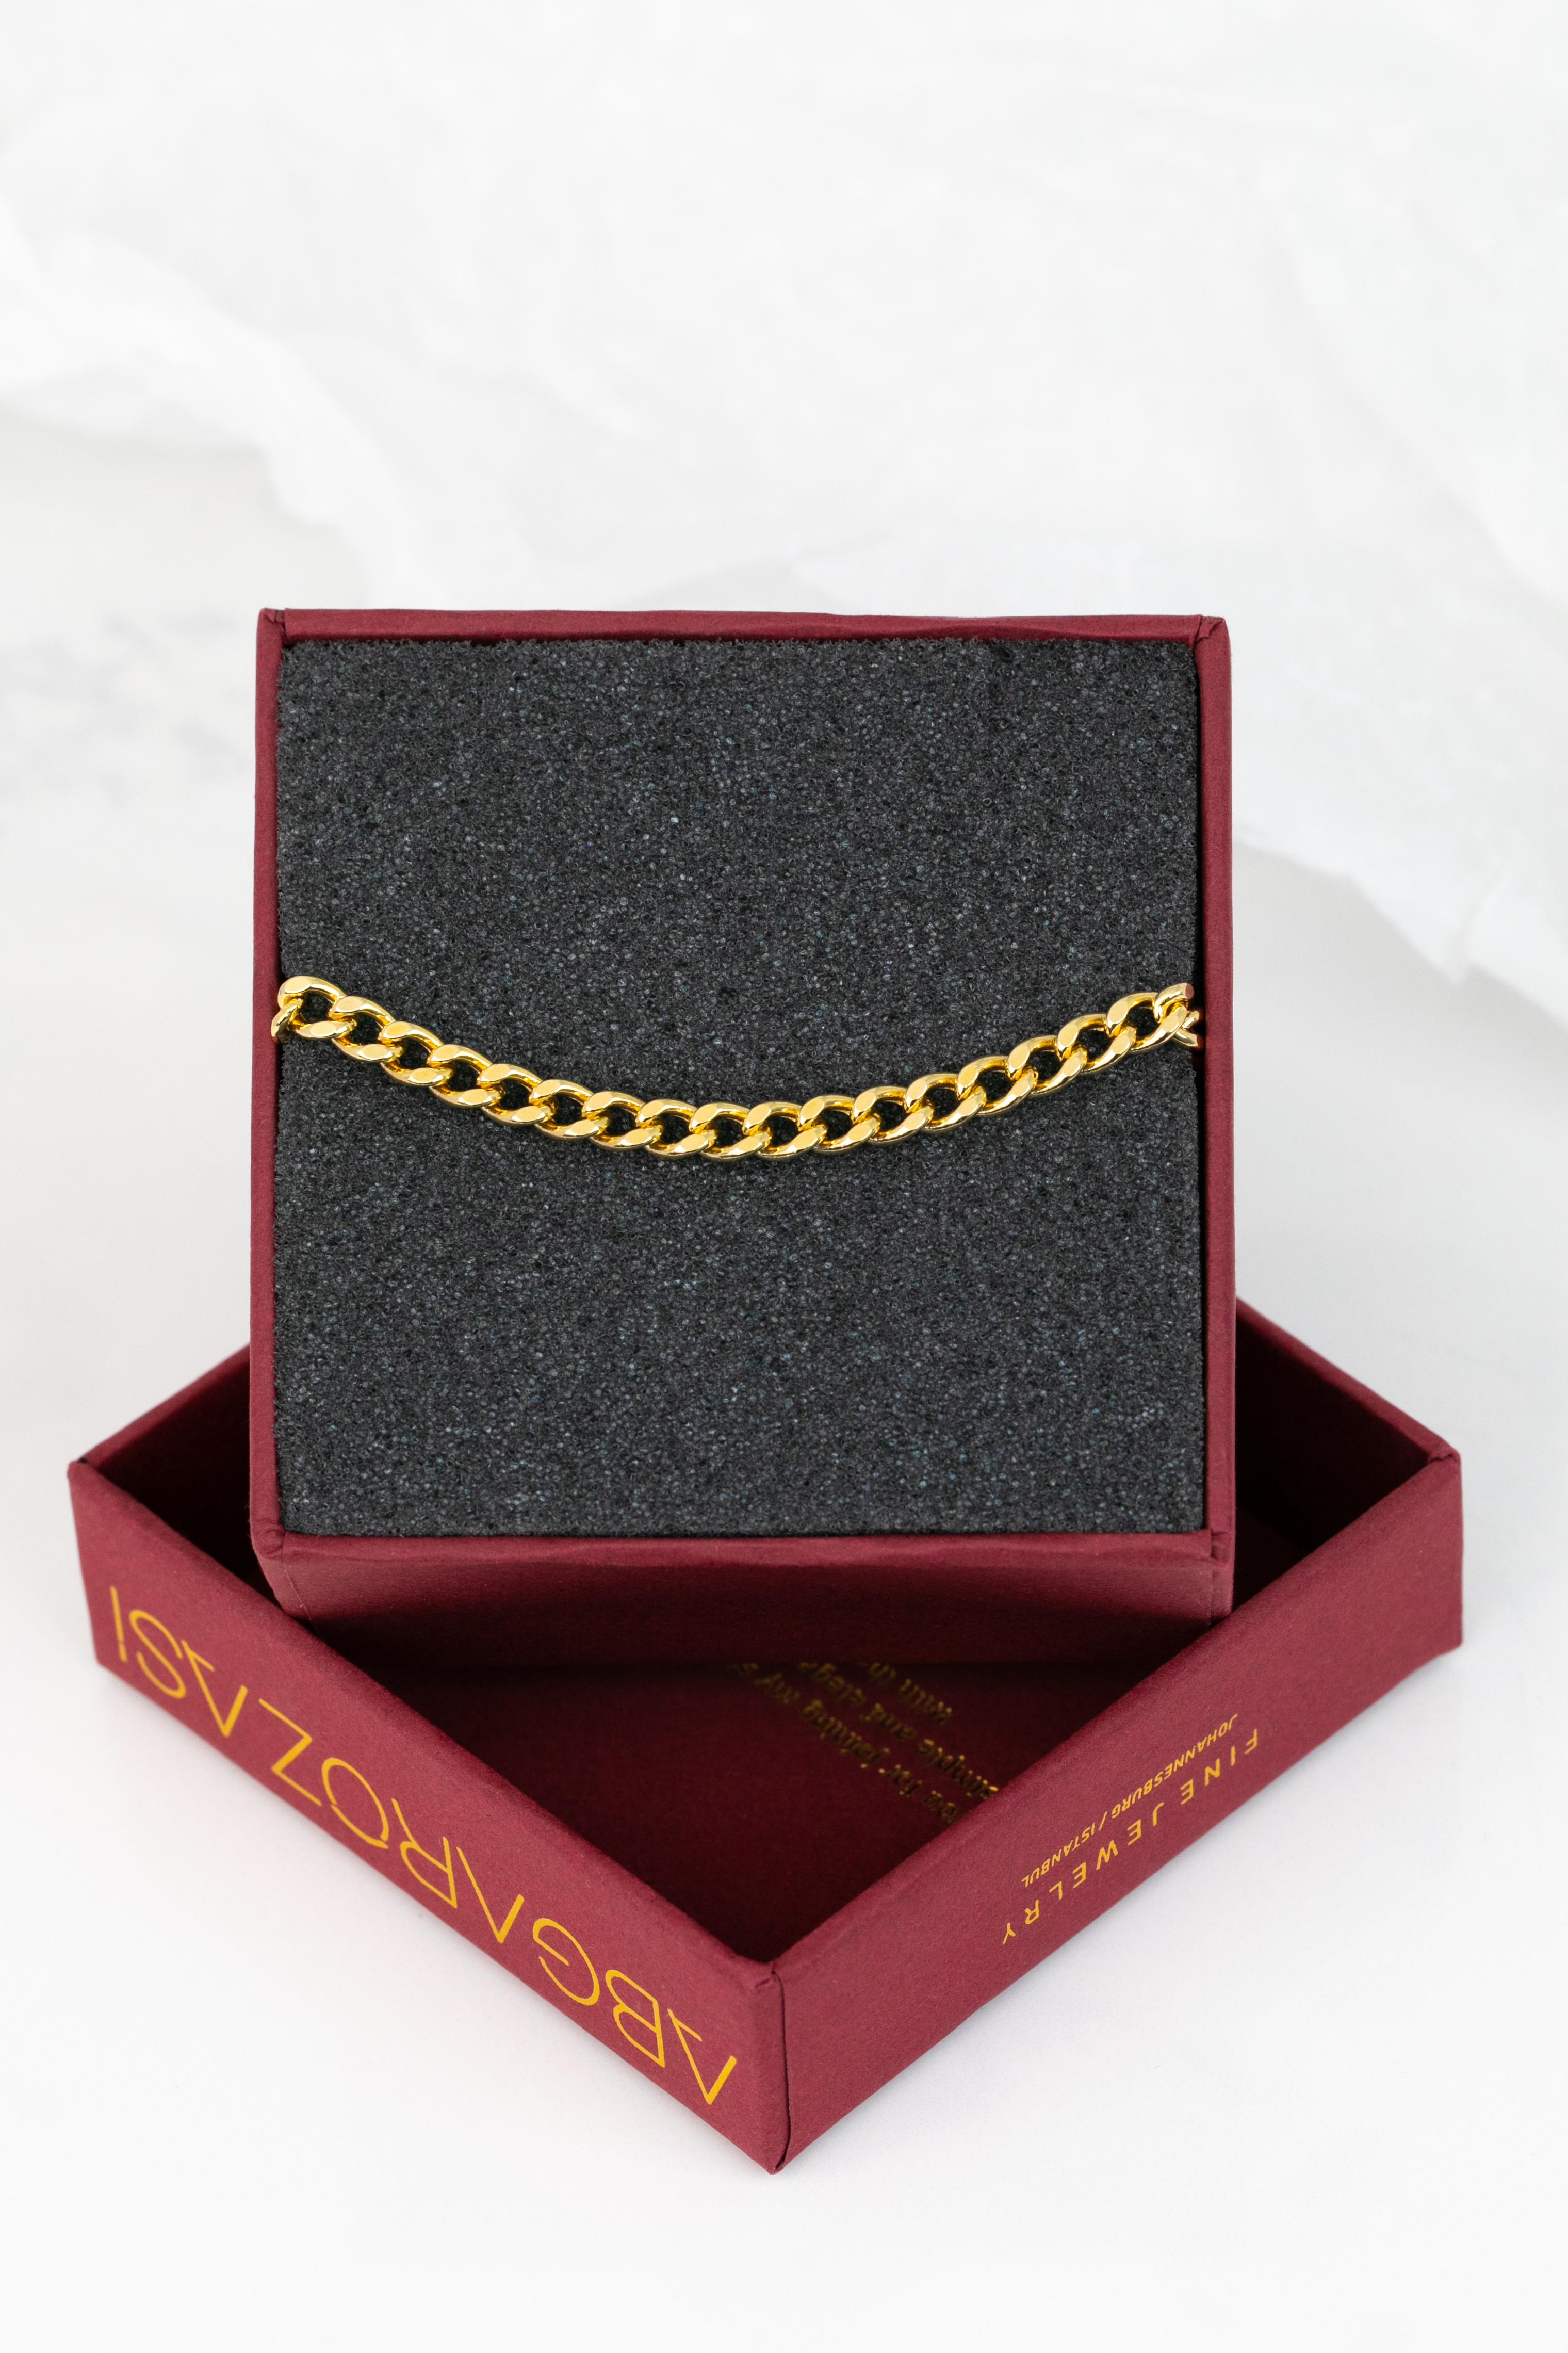 14K Gold Bracelet with Bold Chain, 14k Gold Chain Bracelet, Rectangle Bracelet delicate bracelet created by hands from chain to the stone shapes. Good ideas of dainty bracelet or stackable bracelet gift for her.

This bracelet was made with quality